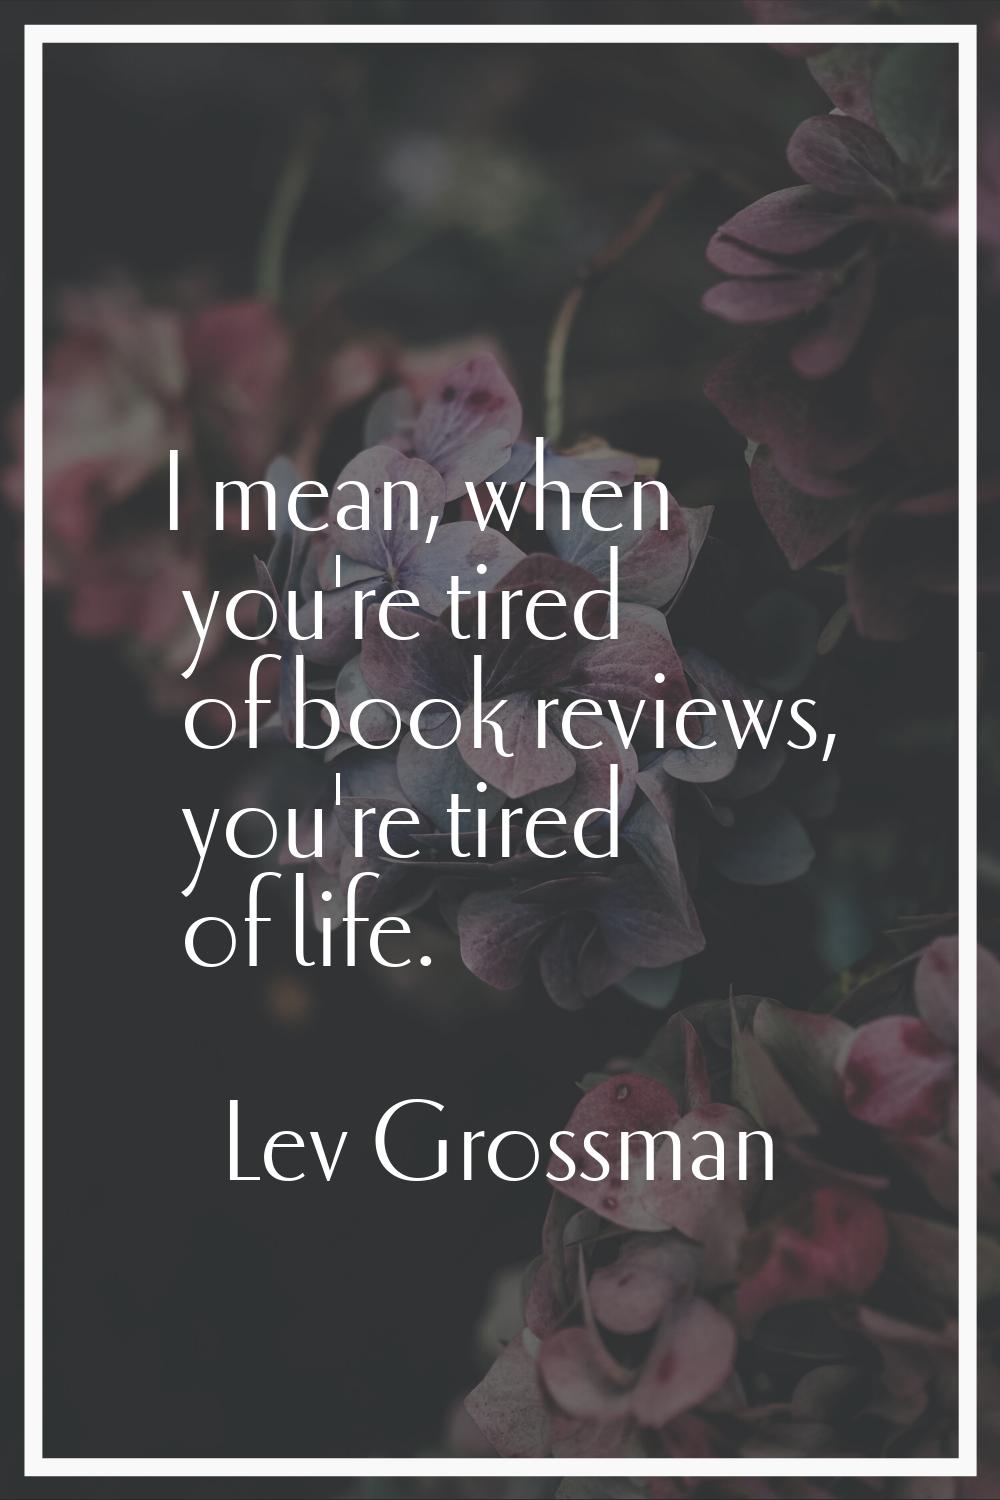 I mean, when you're tired of book reviews, you're tired of life.